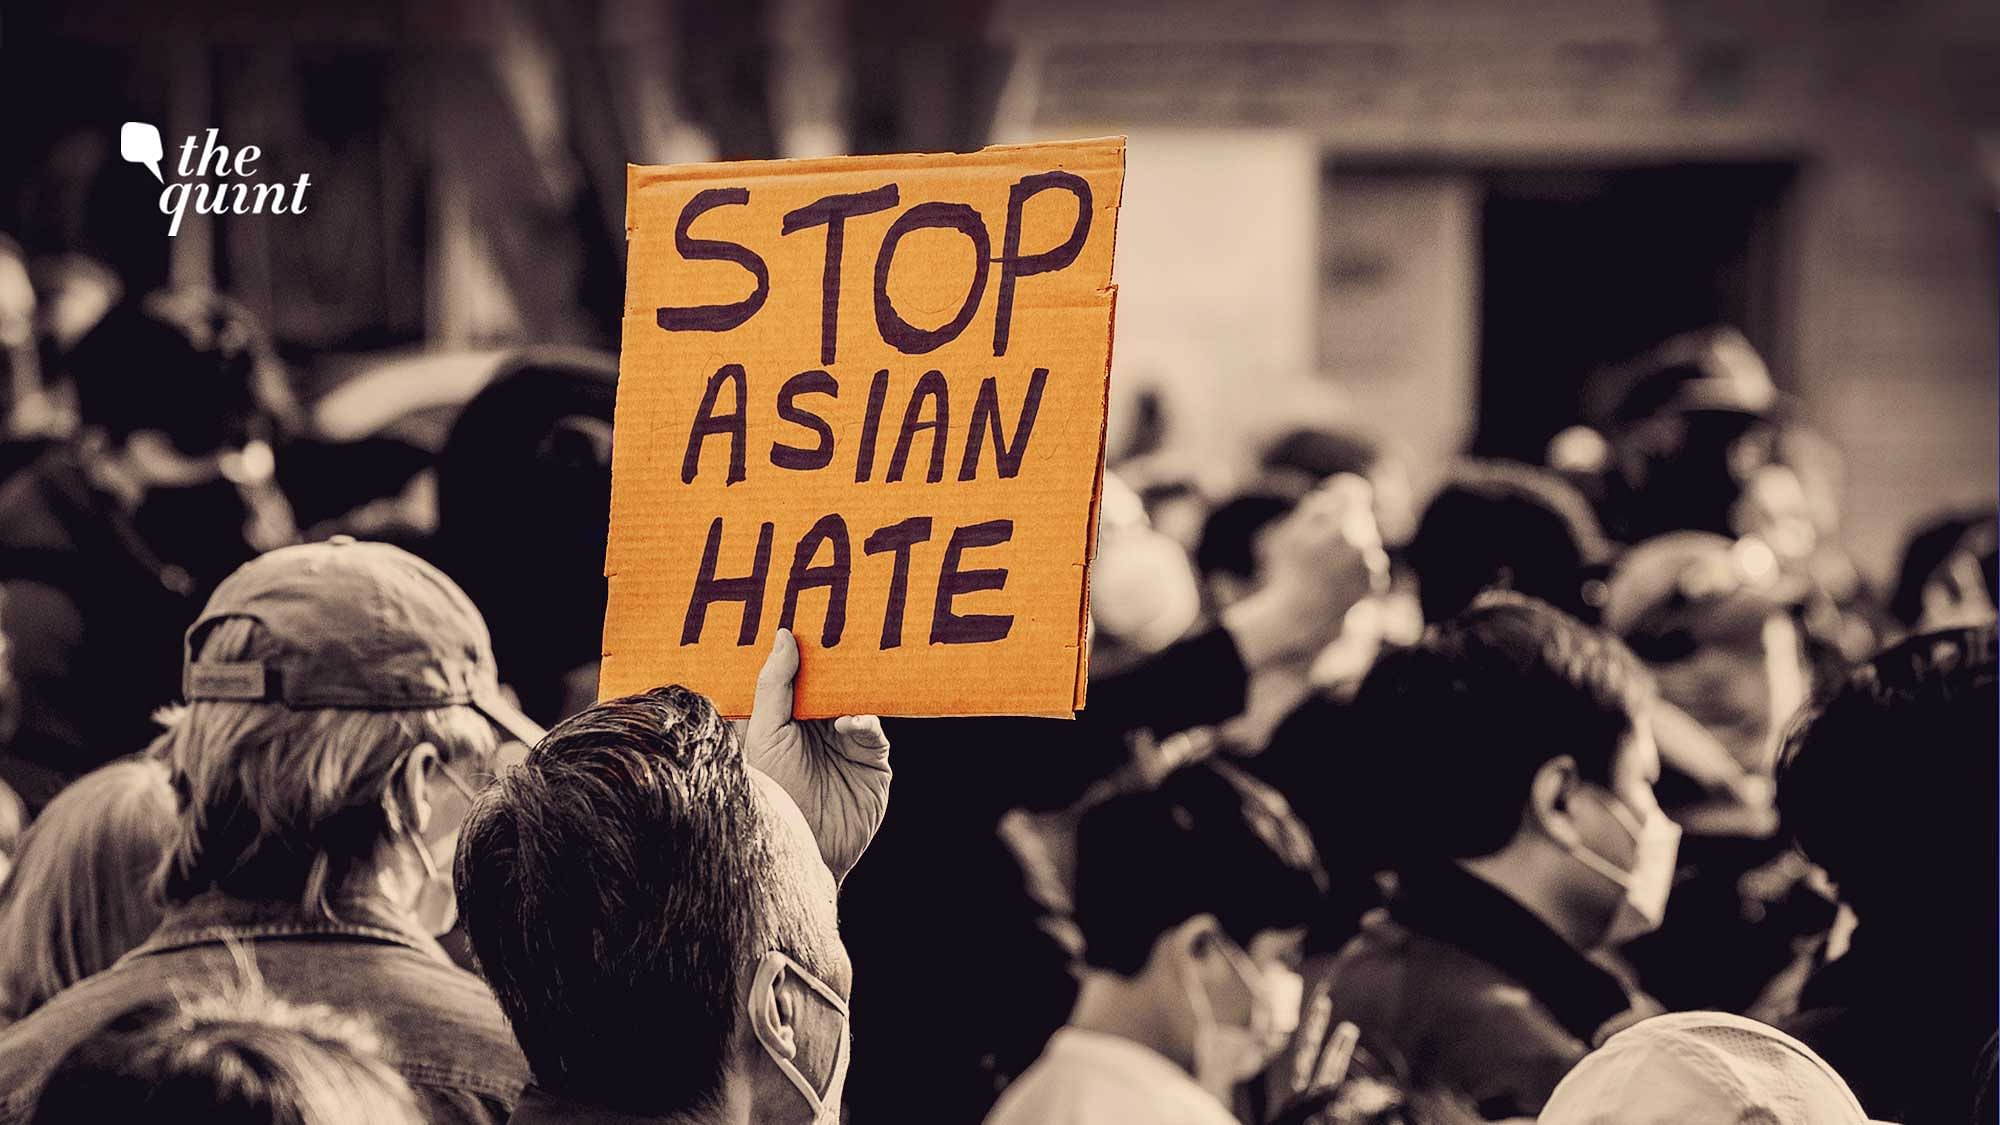 Crimes against Asian Americans are on the rise.